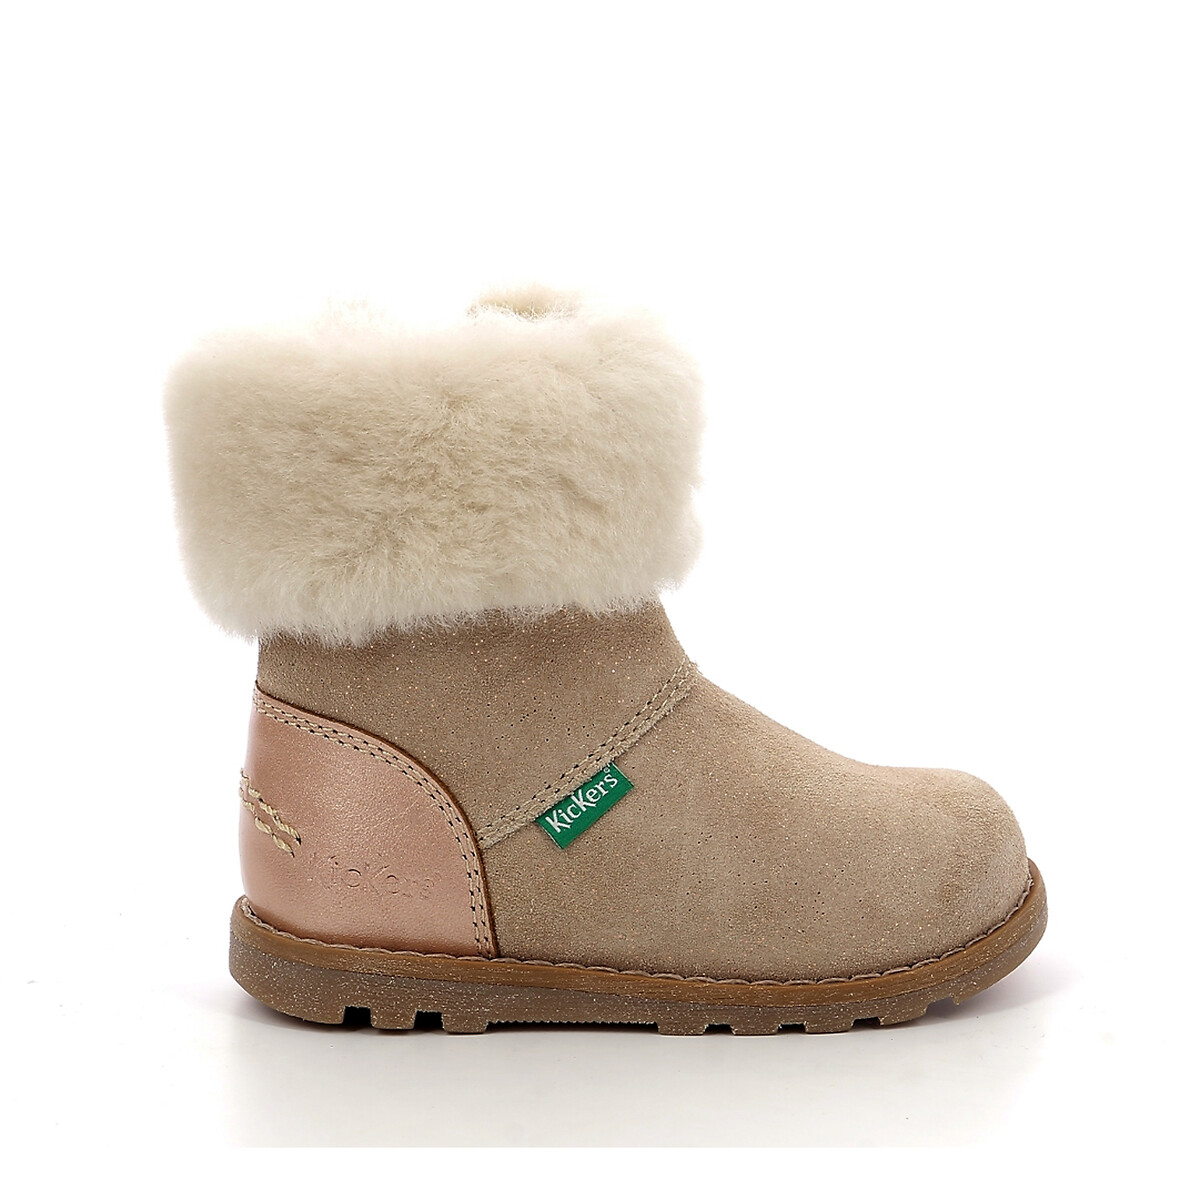 Image of Kids Nonofur Calf Boots in Leather with Faux Fur Lining